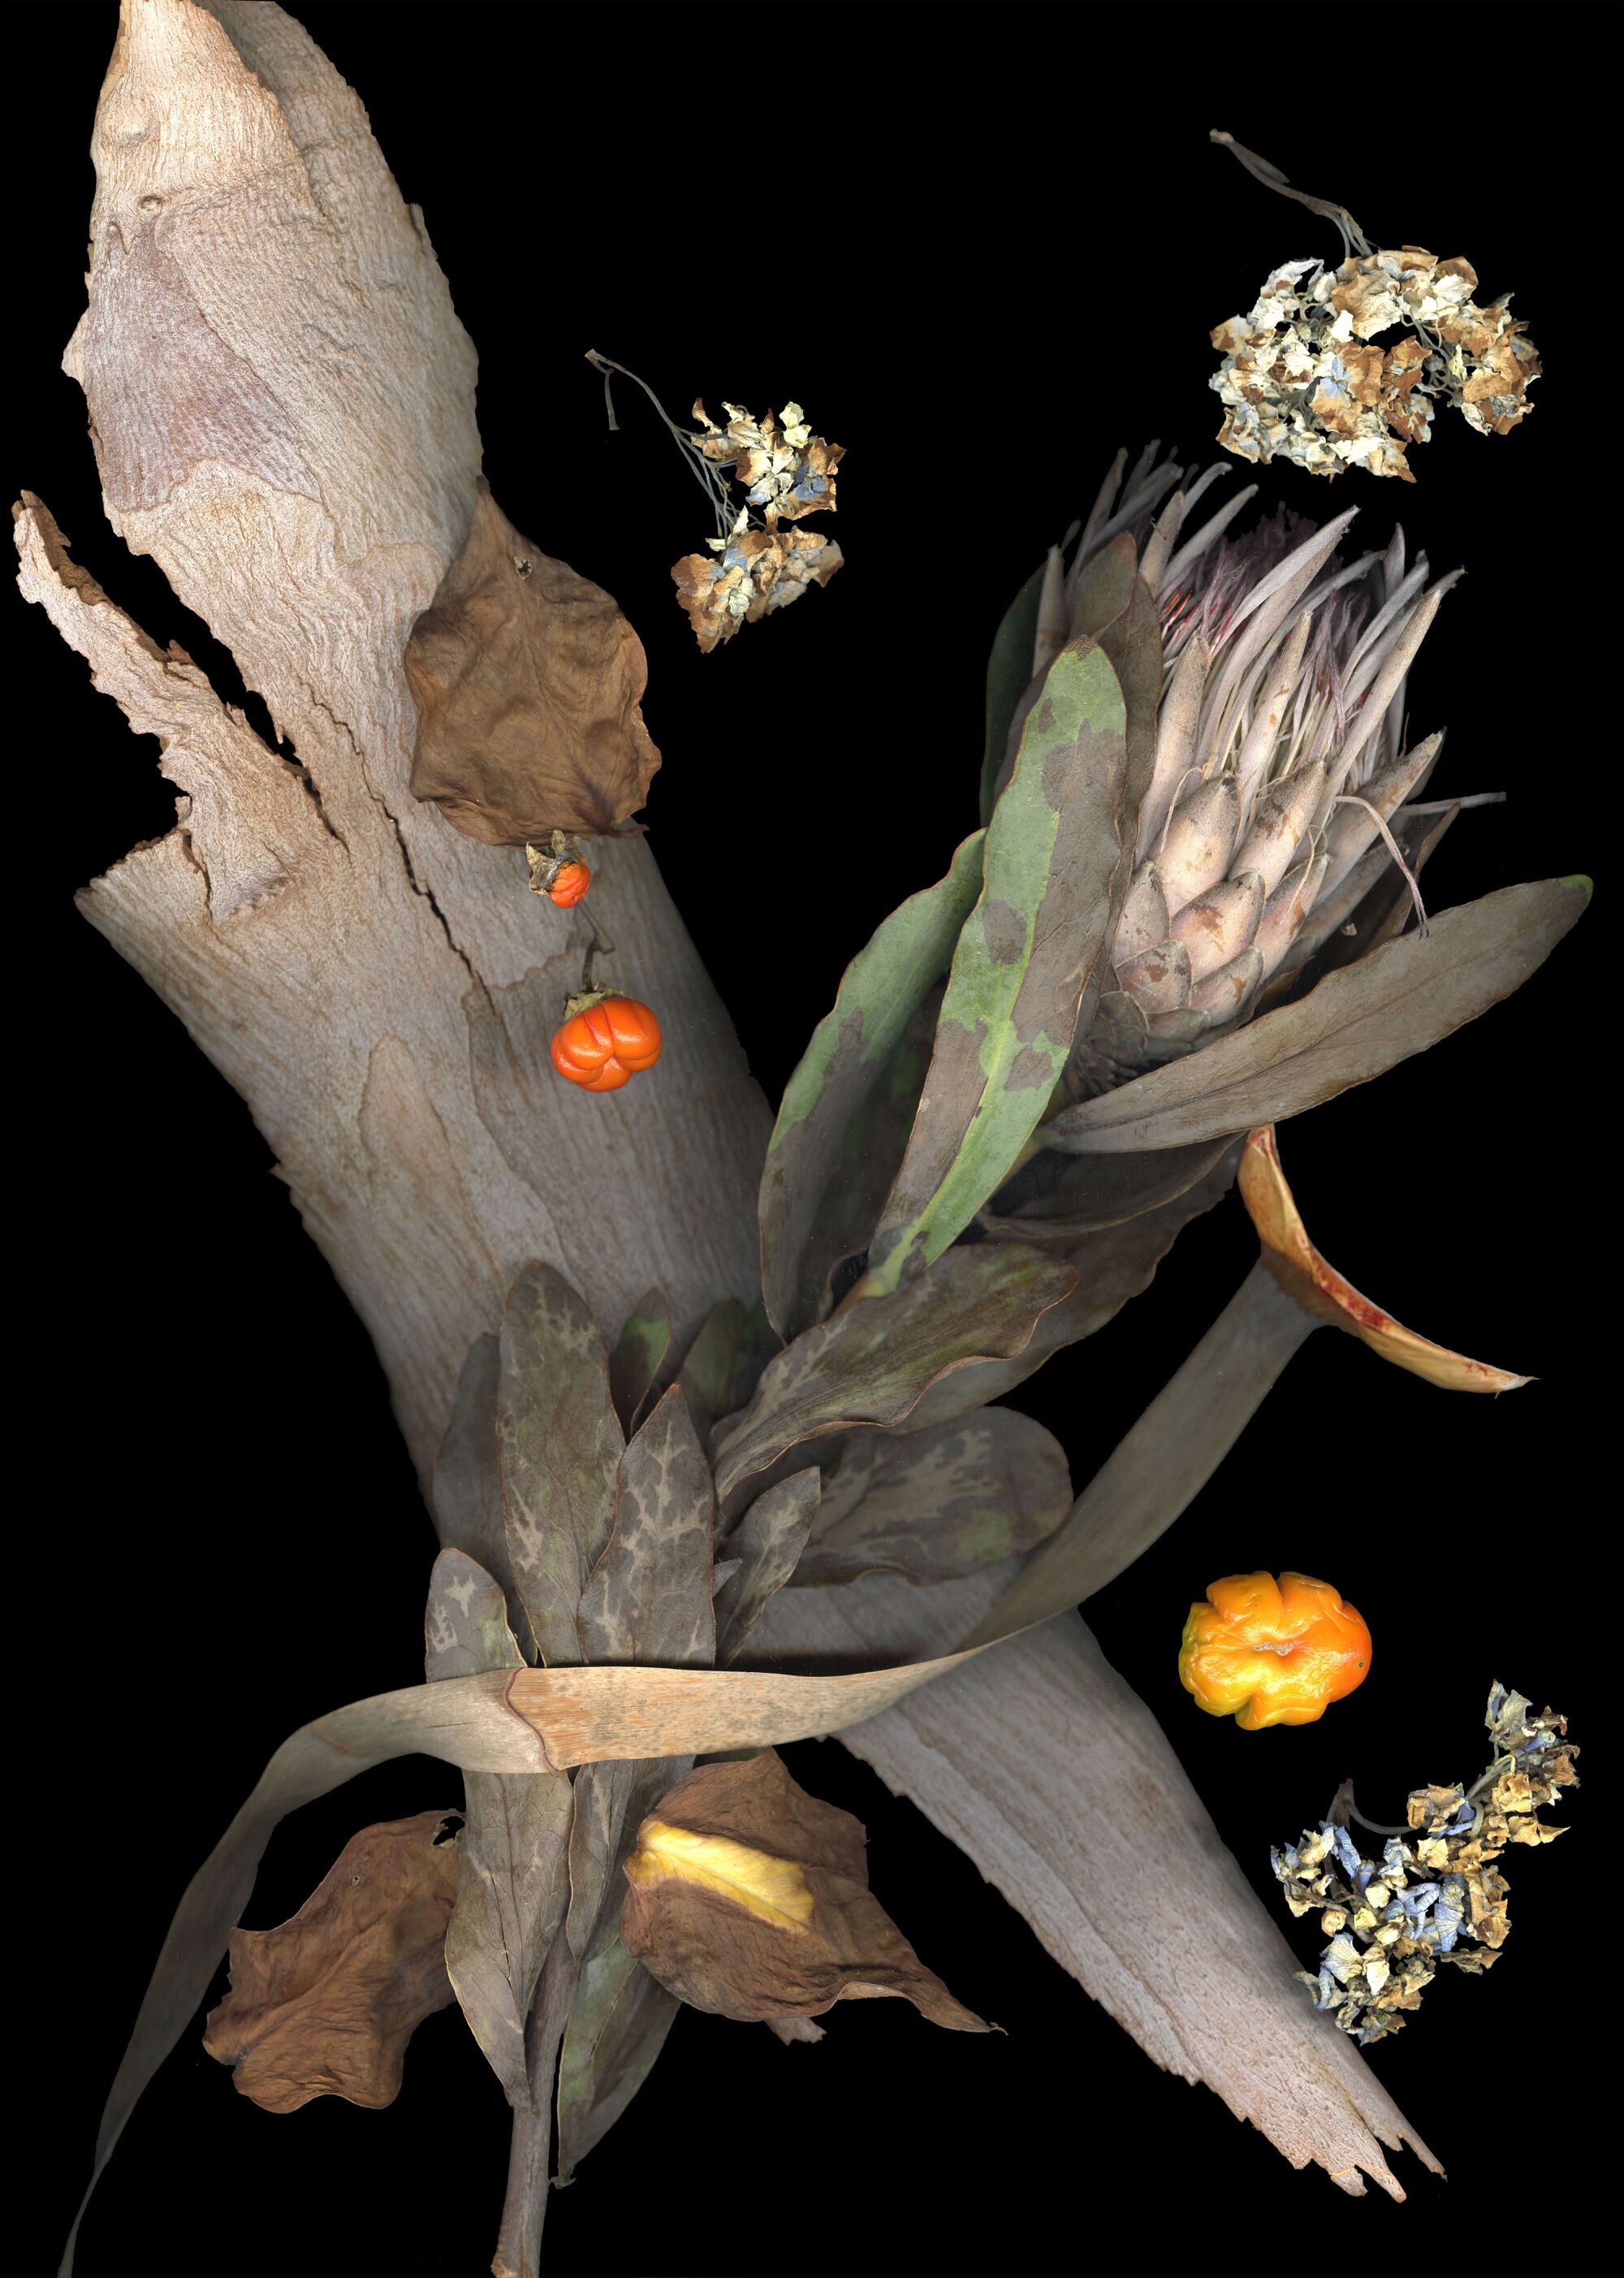 This untitled image is a part of Faiya Fredman's "Late Botanicals Series."